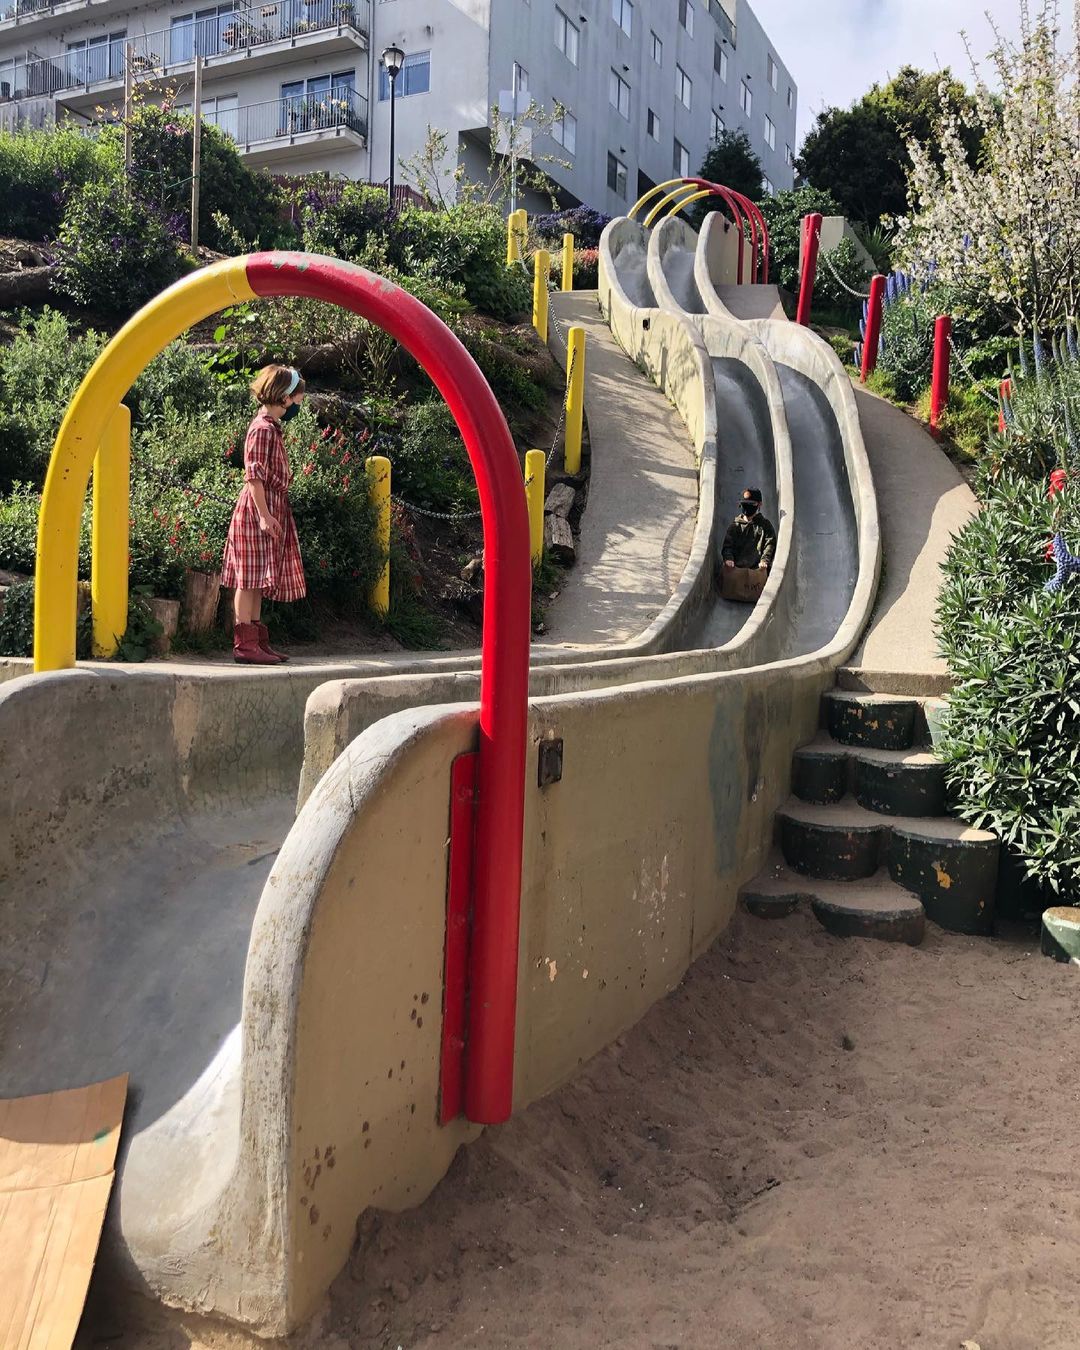 Two large concrete slides with red and blue accents wind down a hill. A little girl in a red plaid dress watches as another child comes down the slide.